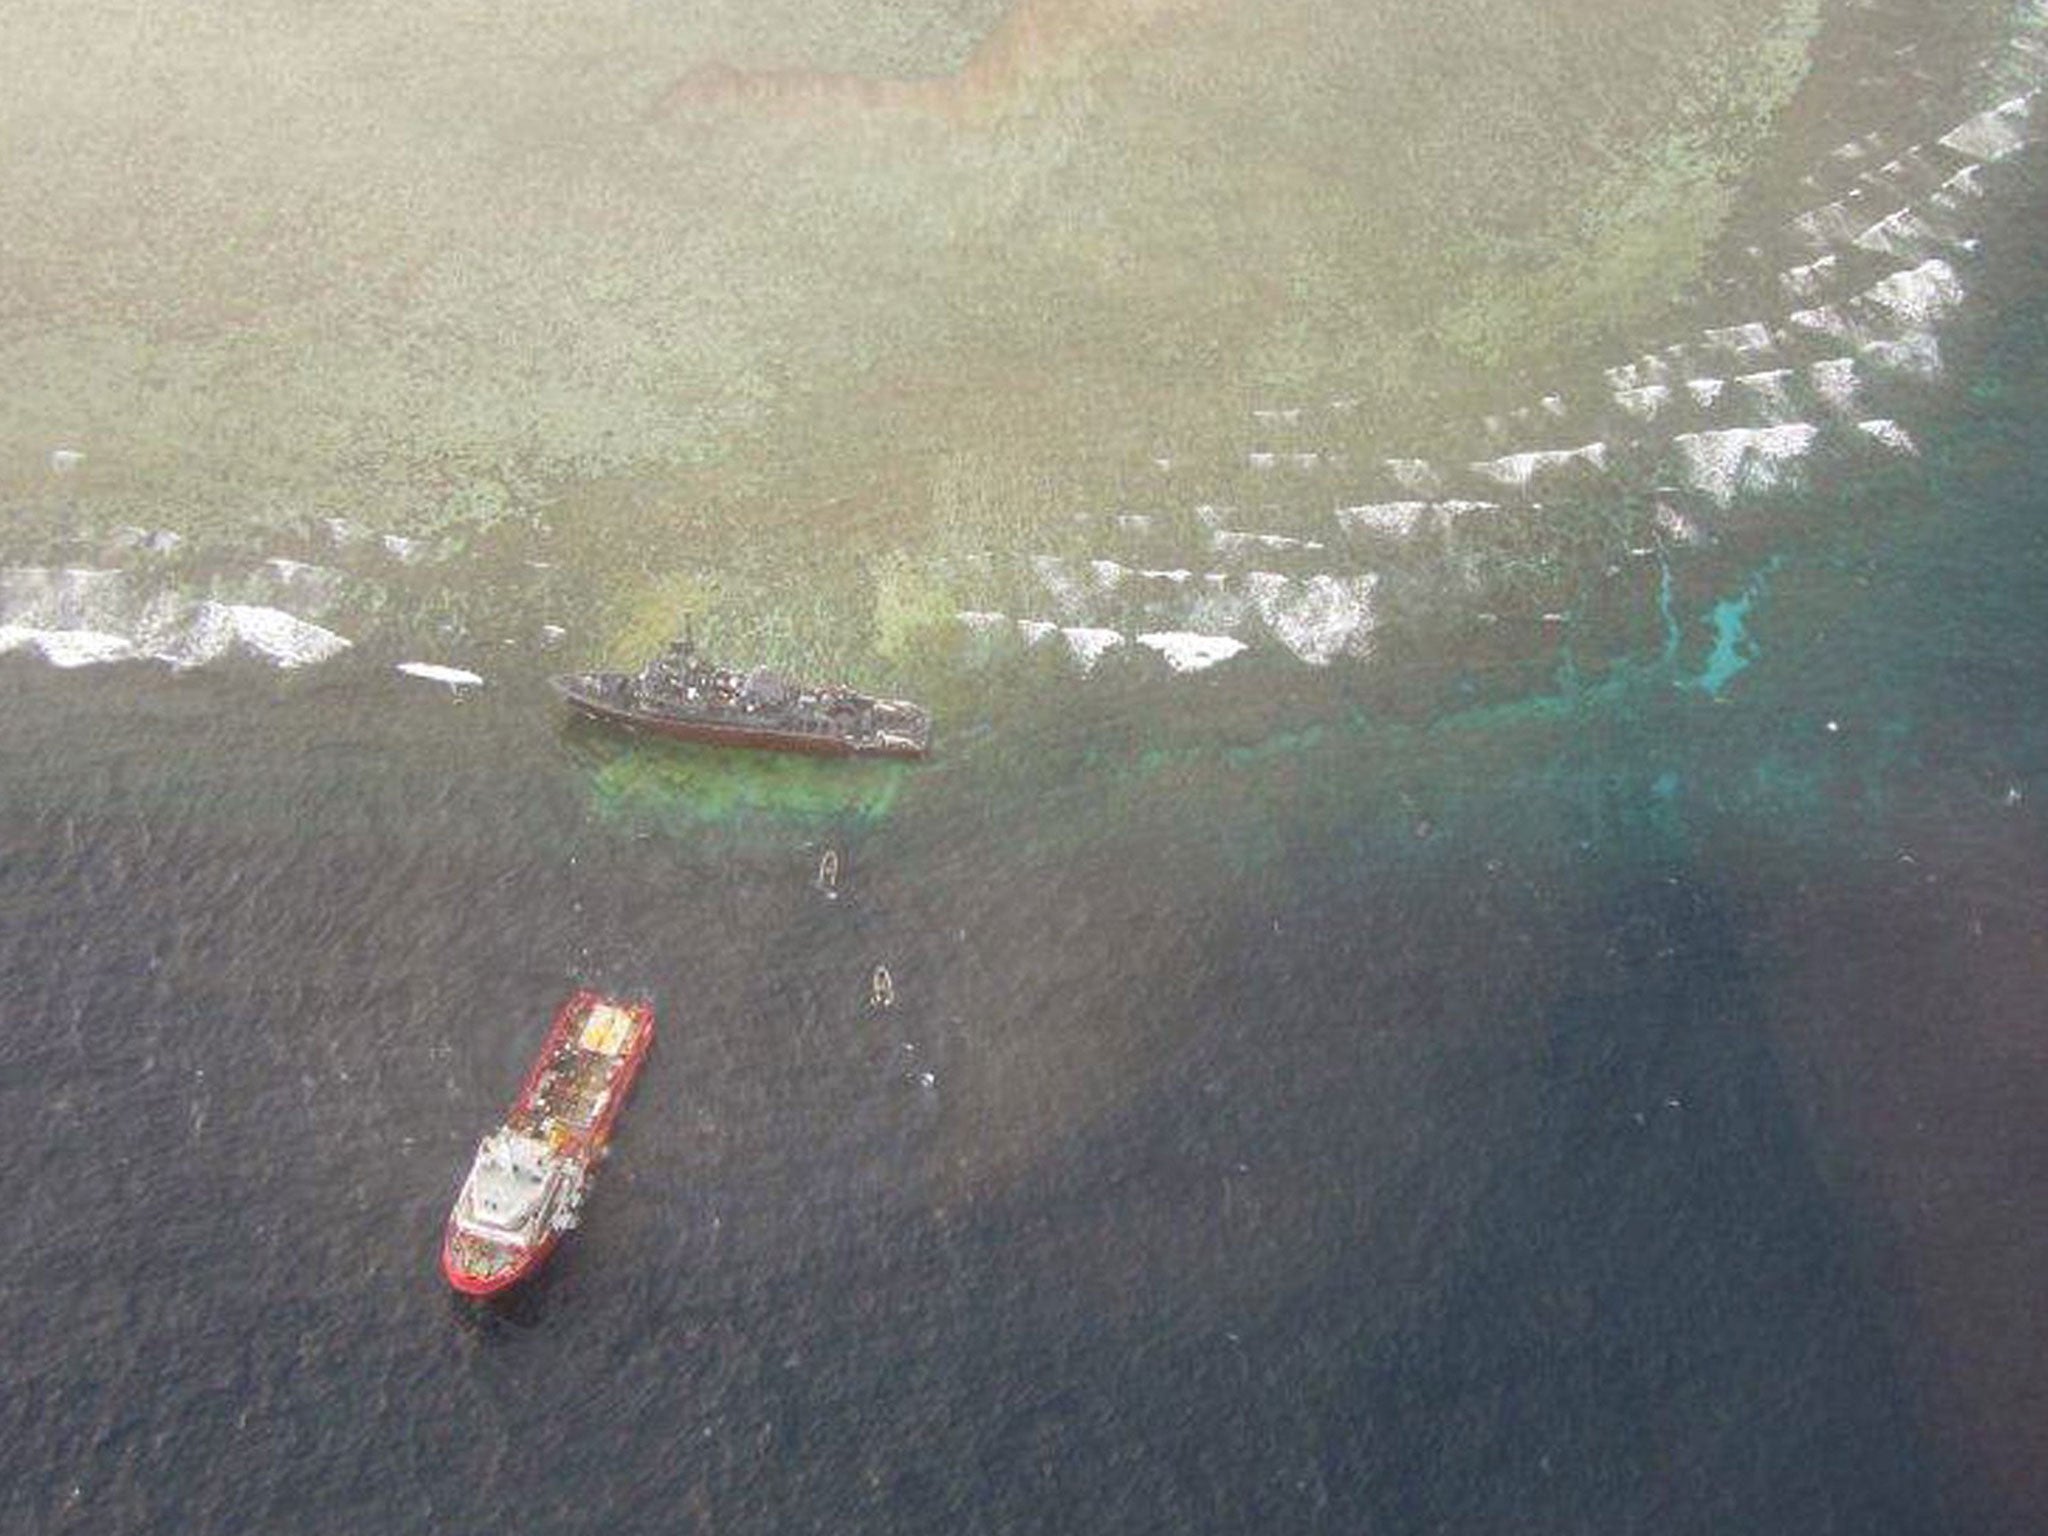 The USS Guardian (R) at the Tubbataha reef after it ran aground, in western island of Palawan, while another US vessel stands by. The US Navy will have to break it into pieces and then move it